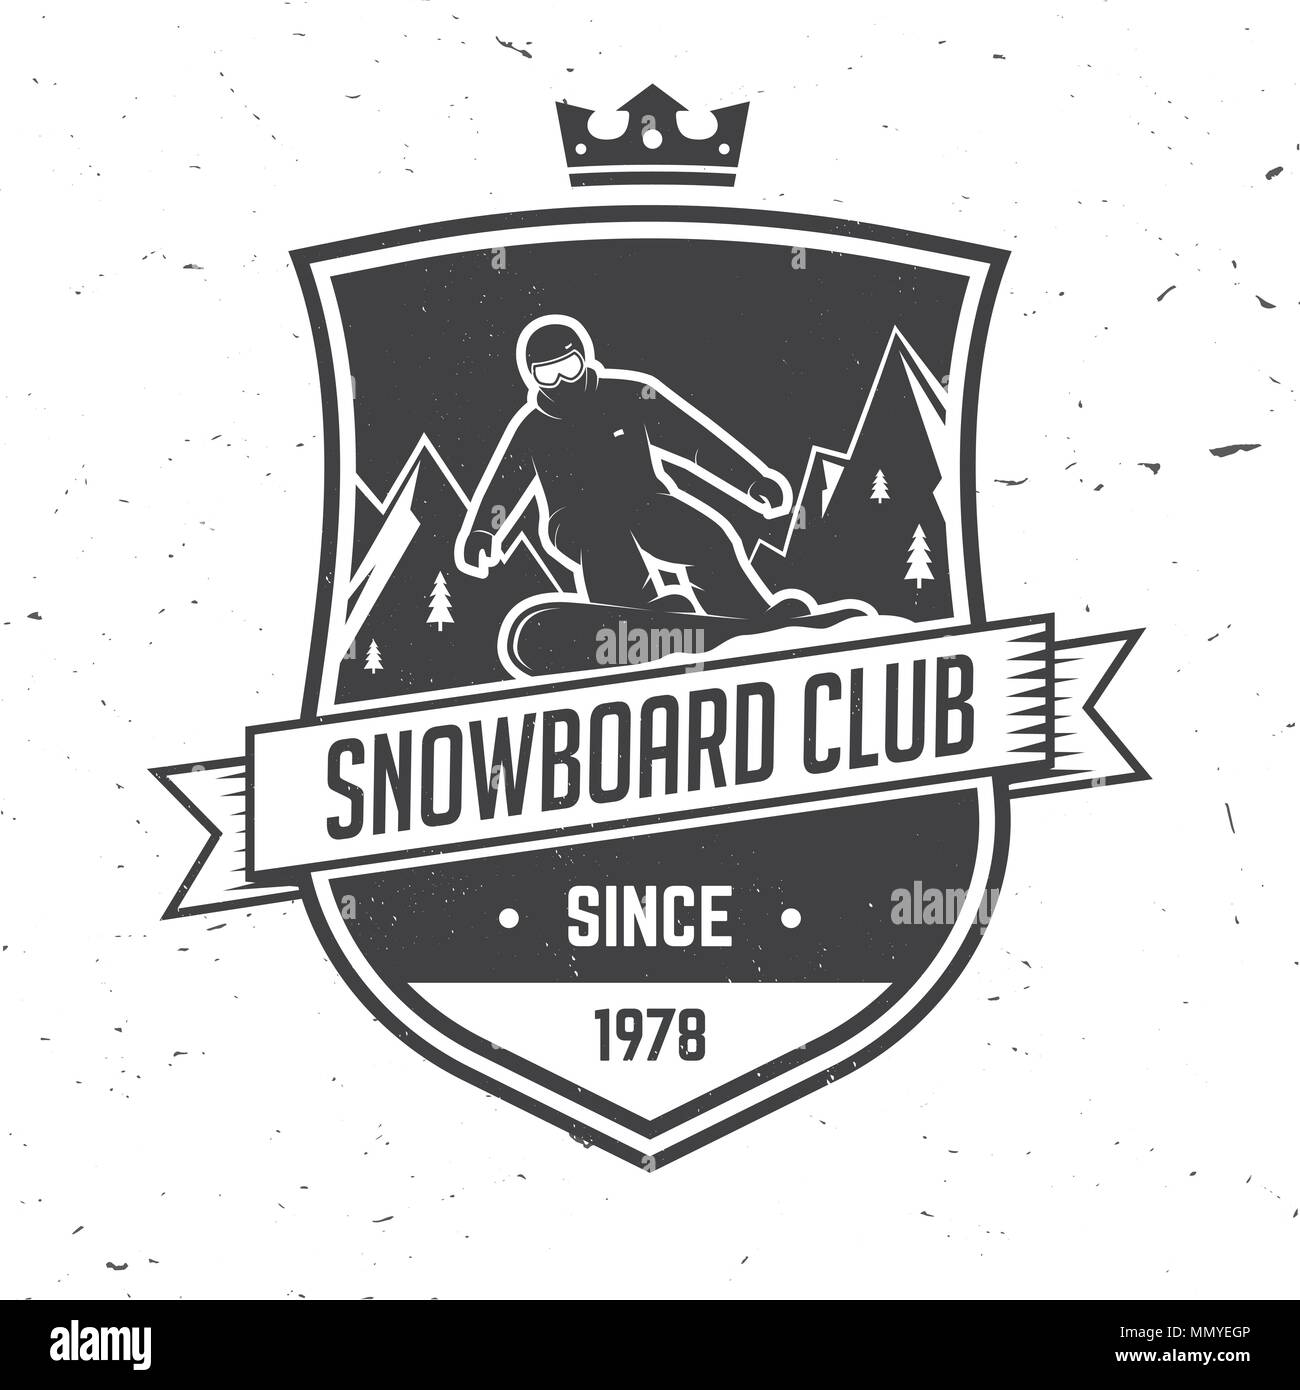 Snowboard Club. Vector illustration. Concept for shirt, print, stamp or tee. Vintage typography design with snowboarder and mountain silhouette. Extre Stock Vector